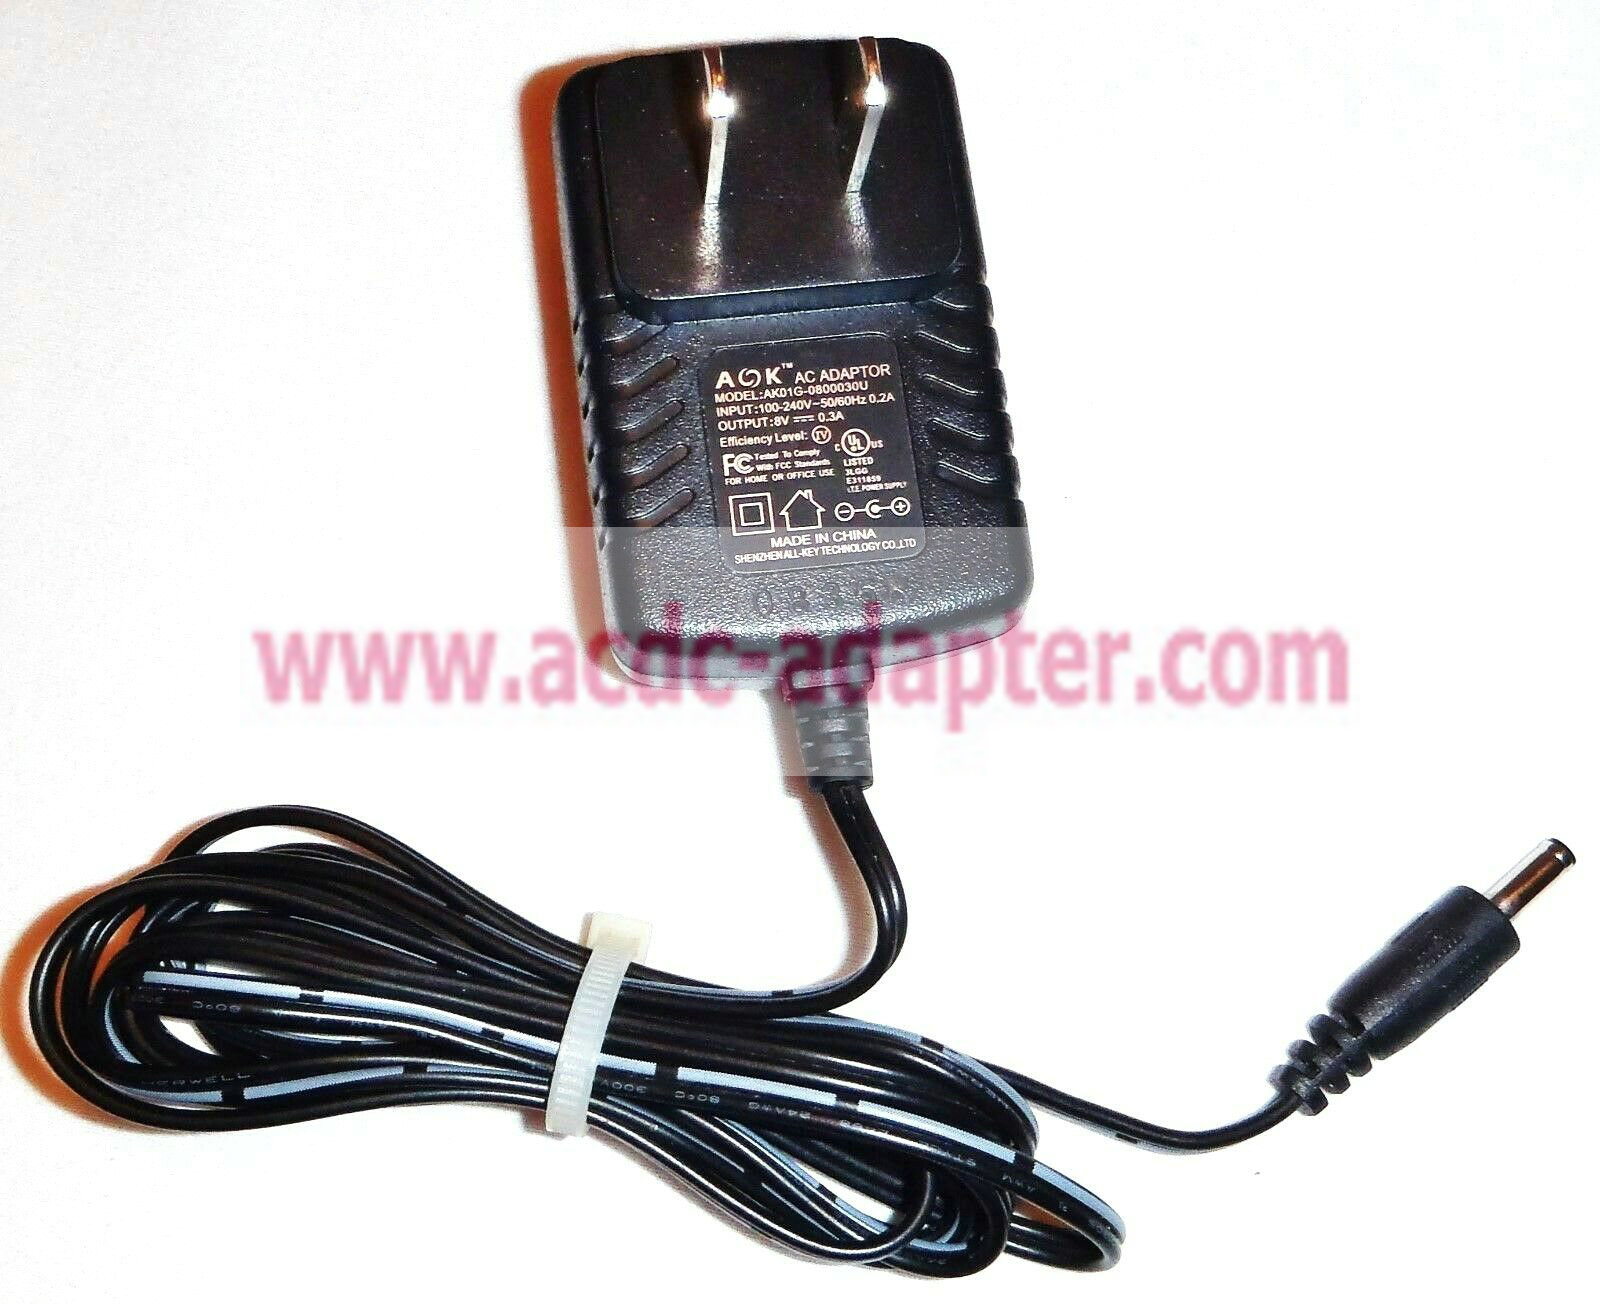 Genuine AOK AK01G-0800030U 8V 0.3A AC/DC Power Supply Battery Charger Adapter